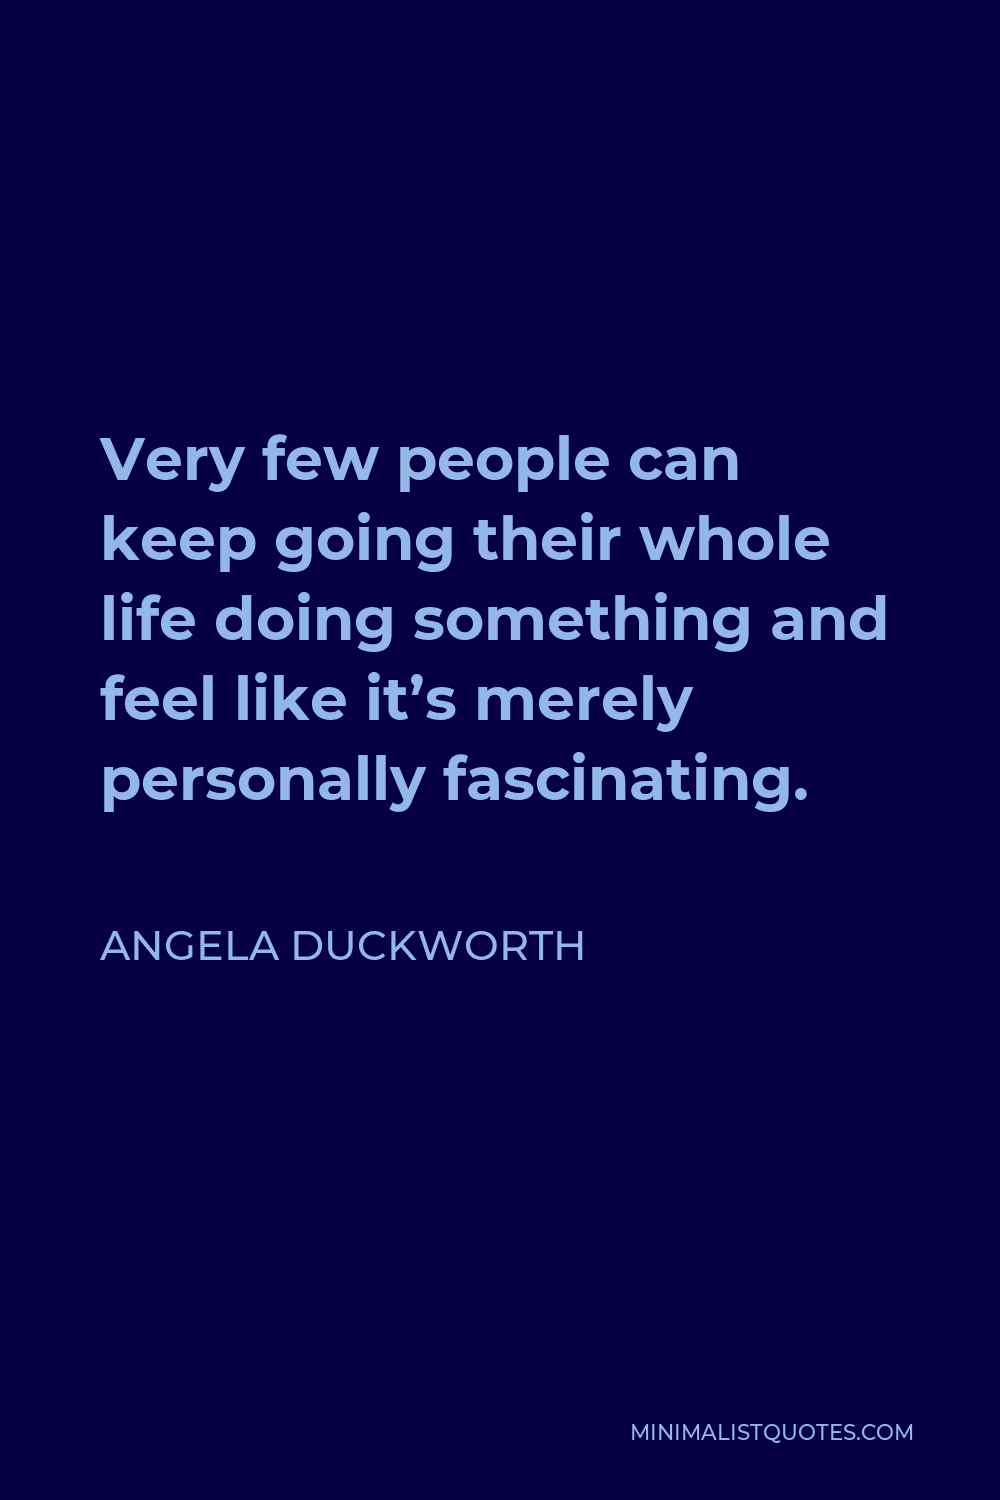 Angela Duckworth Quote - Very few people can keep going their whole life doing something and feel like it’s merely personally fascinating.